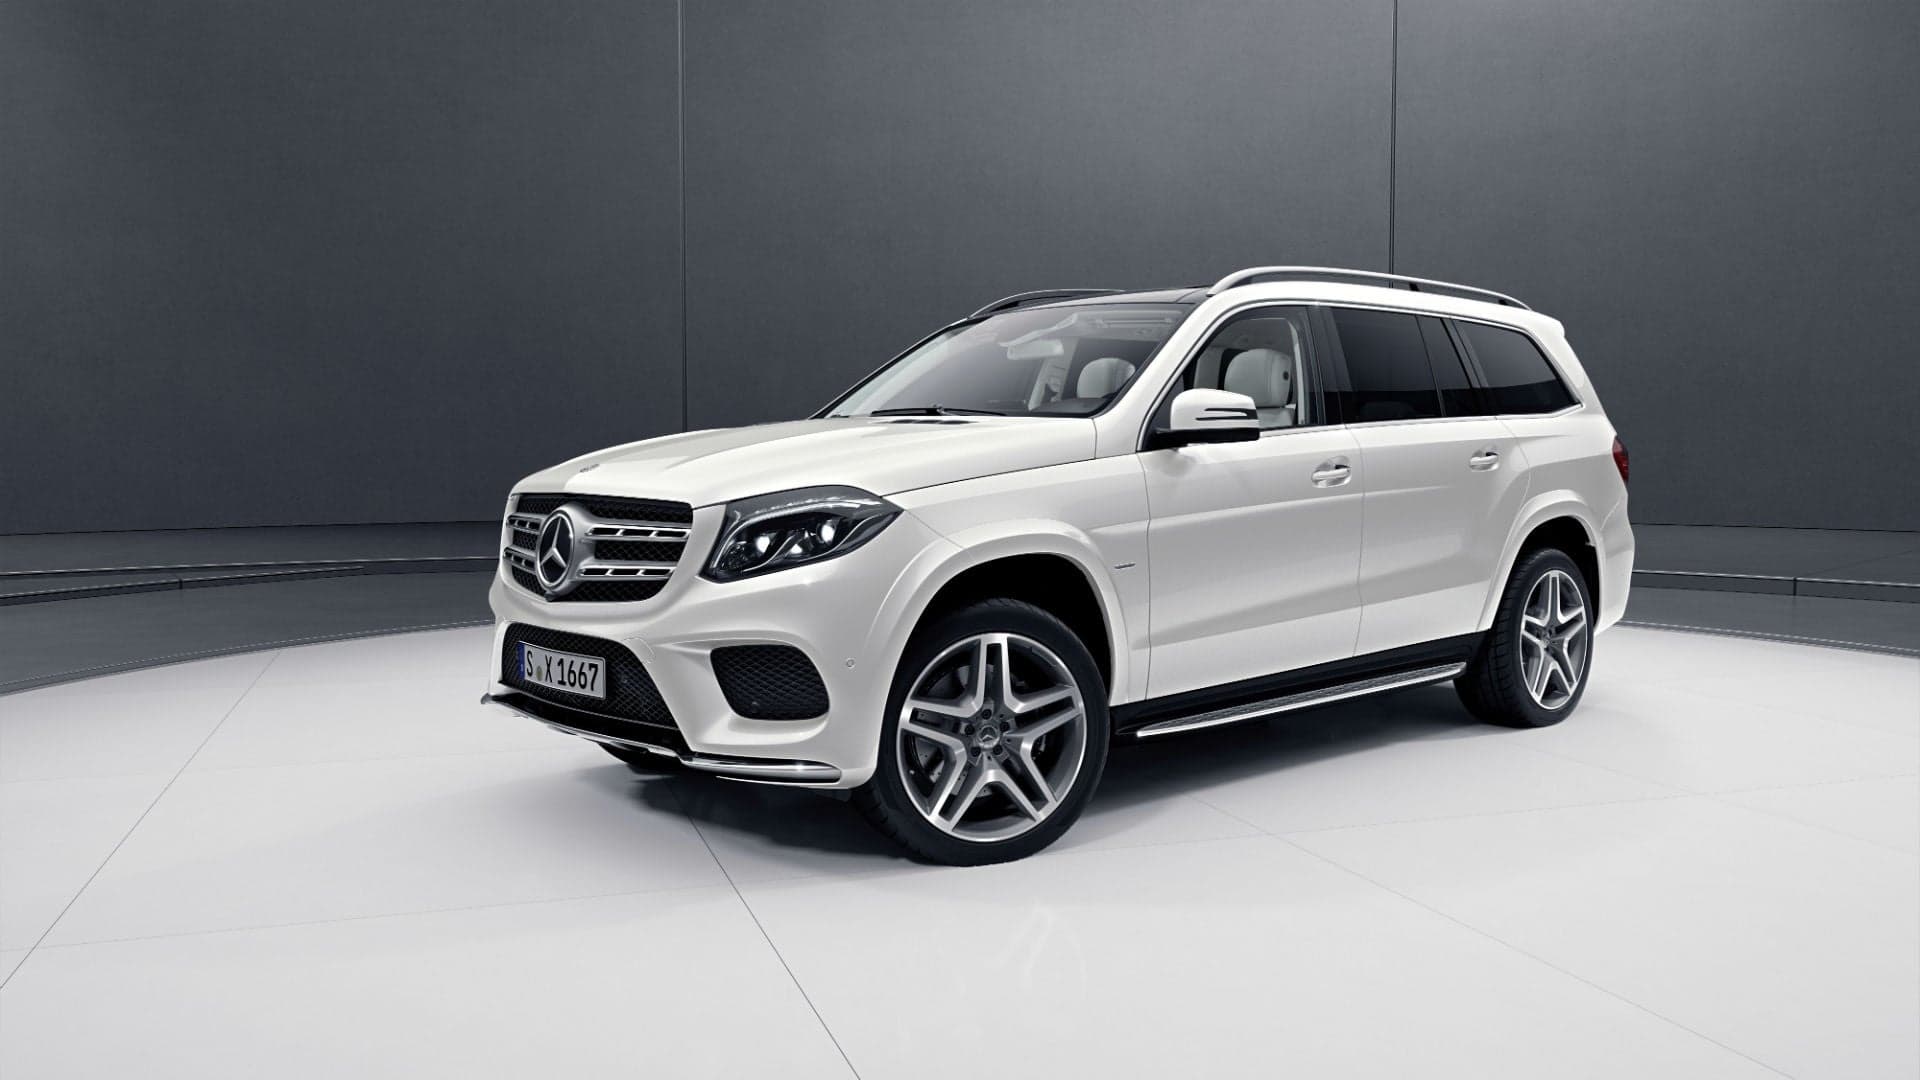 Mercedes-Benz GLS Grand Edition Will Debut in Detroit This Week